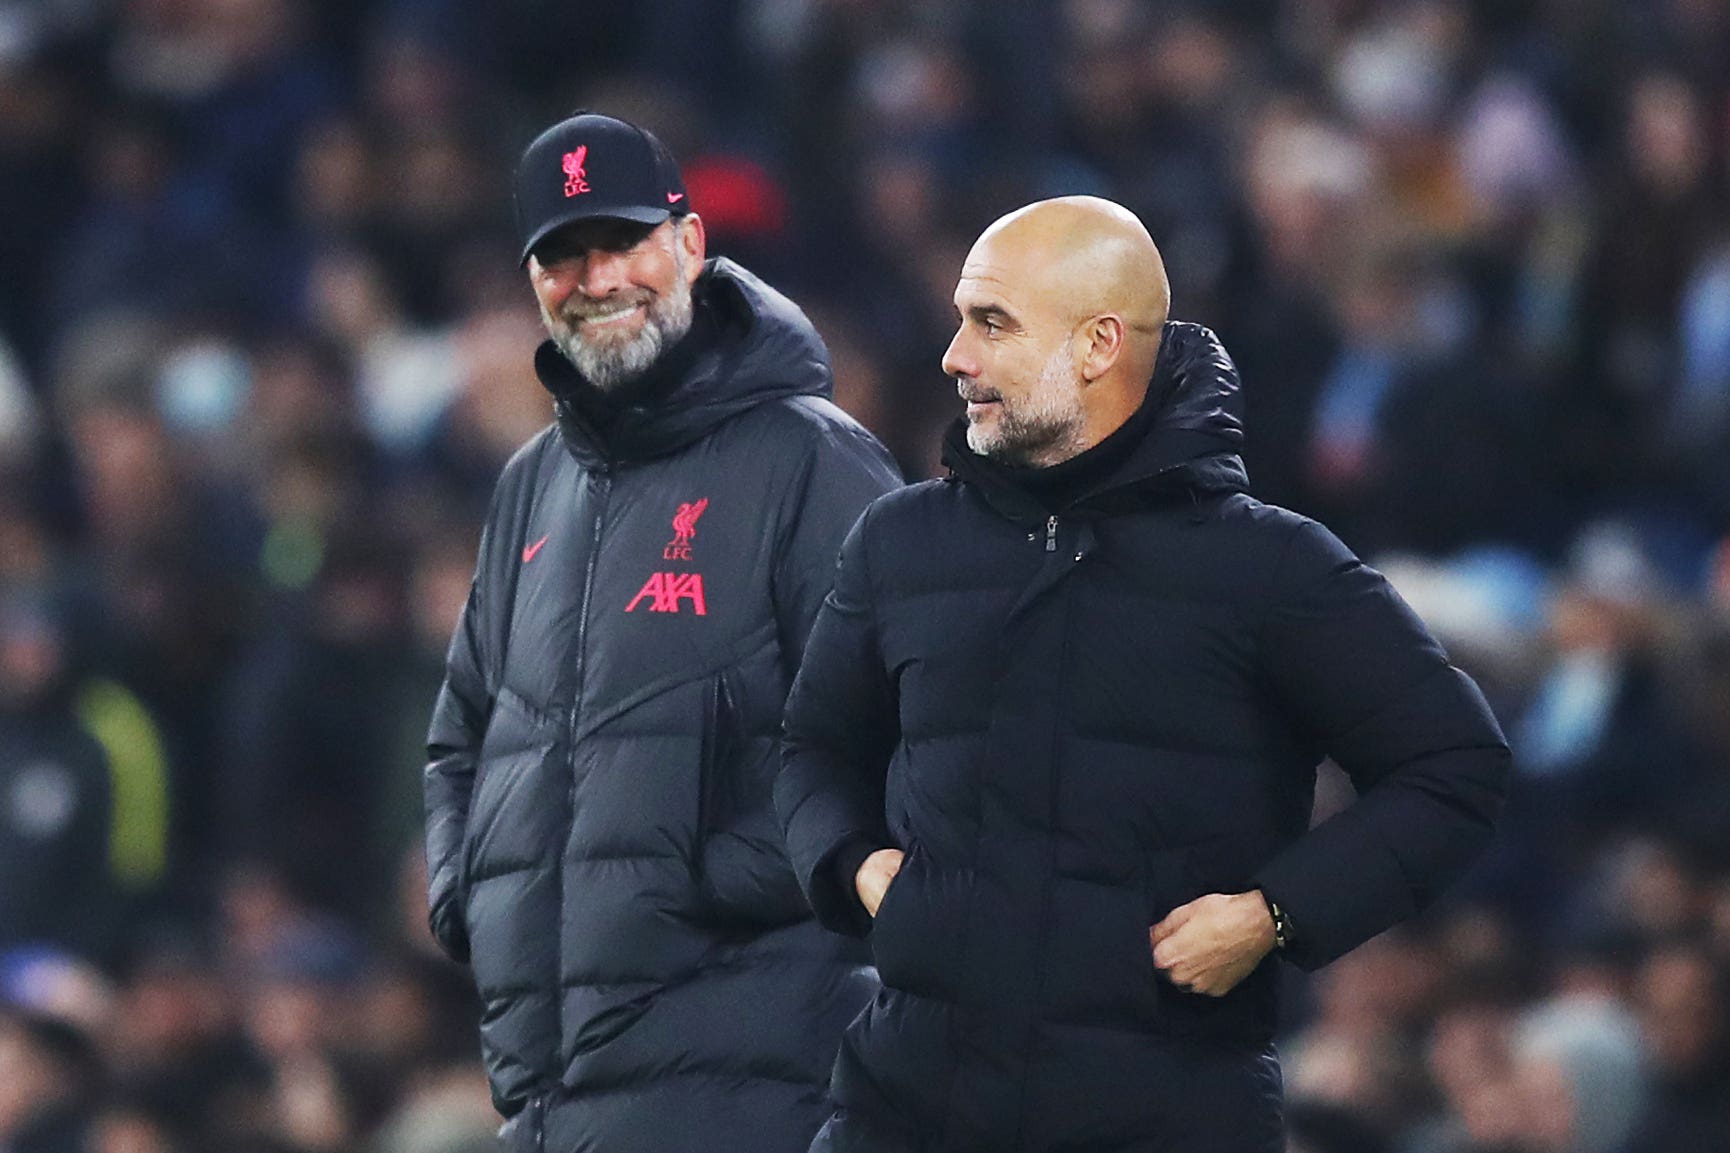 Liverpool manager Jurgen Klopp is full of praise for his Manchester City counterpart Pep Guardiola. 